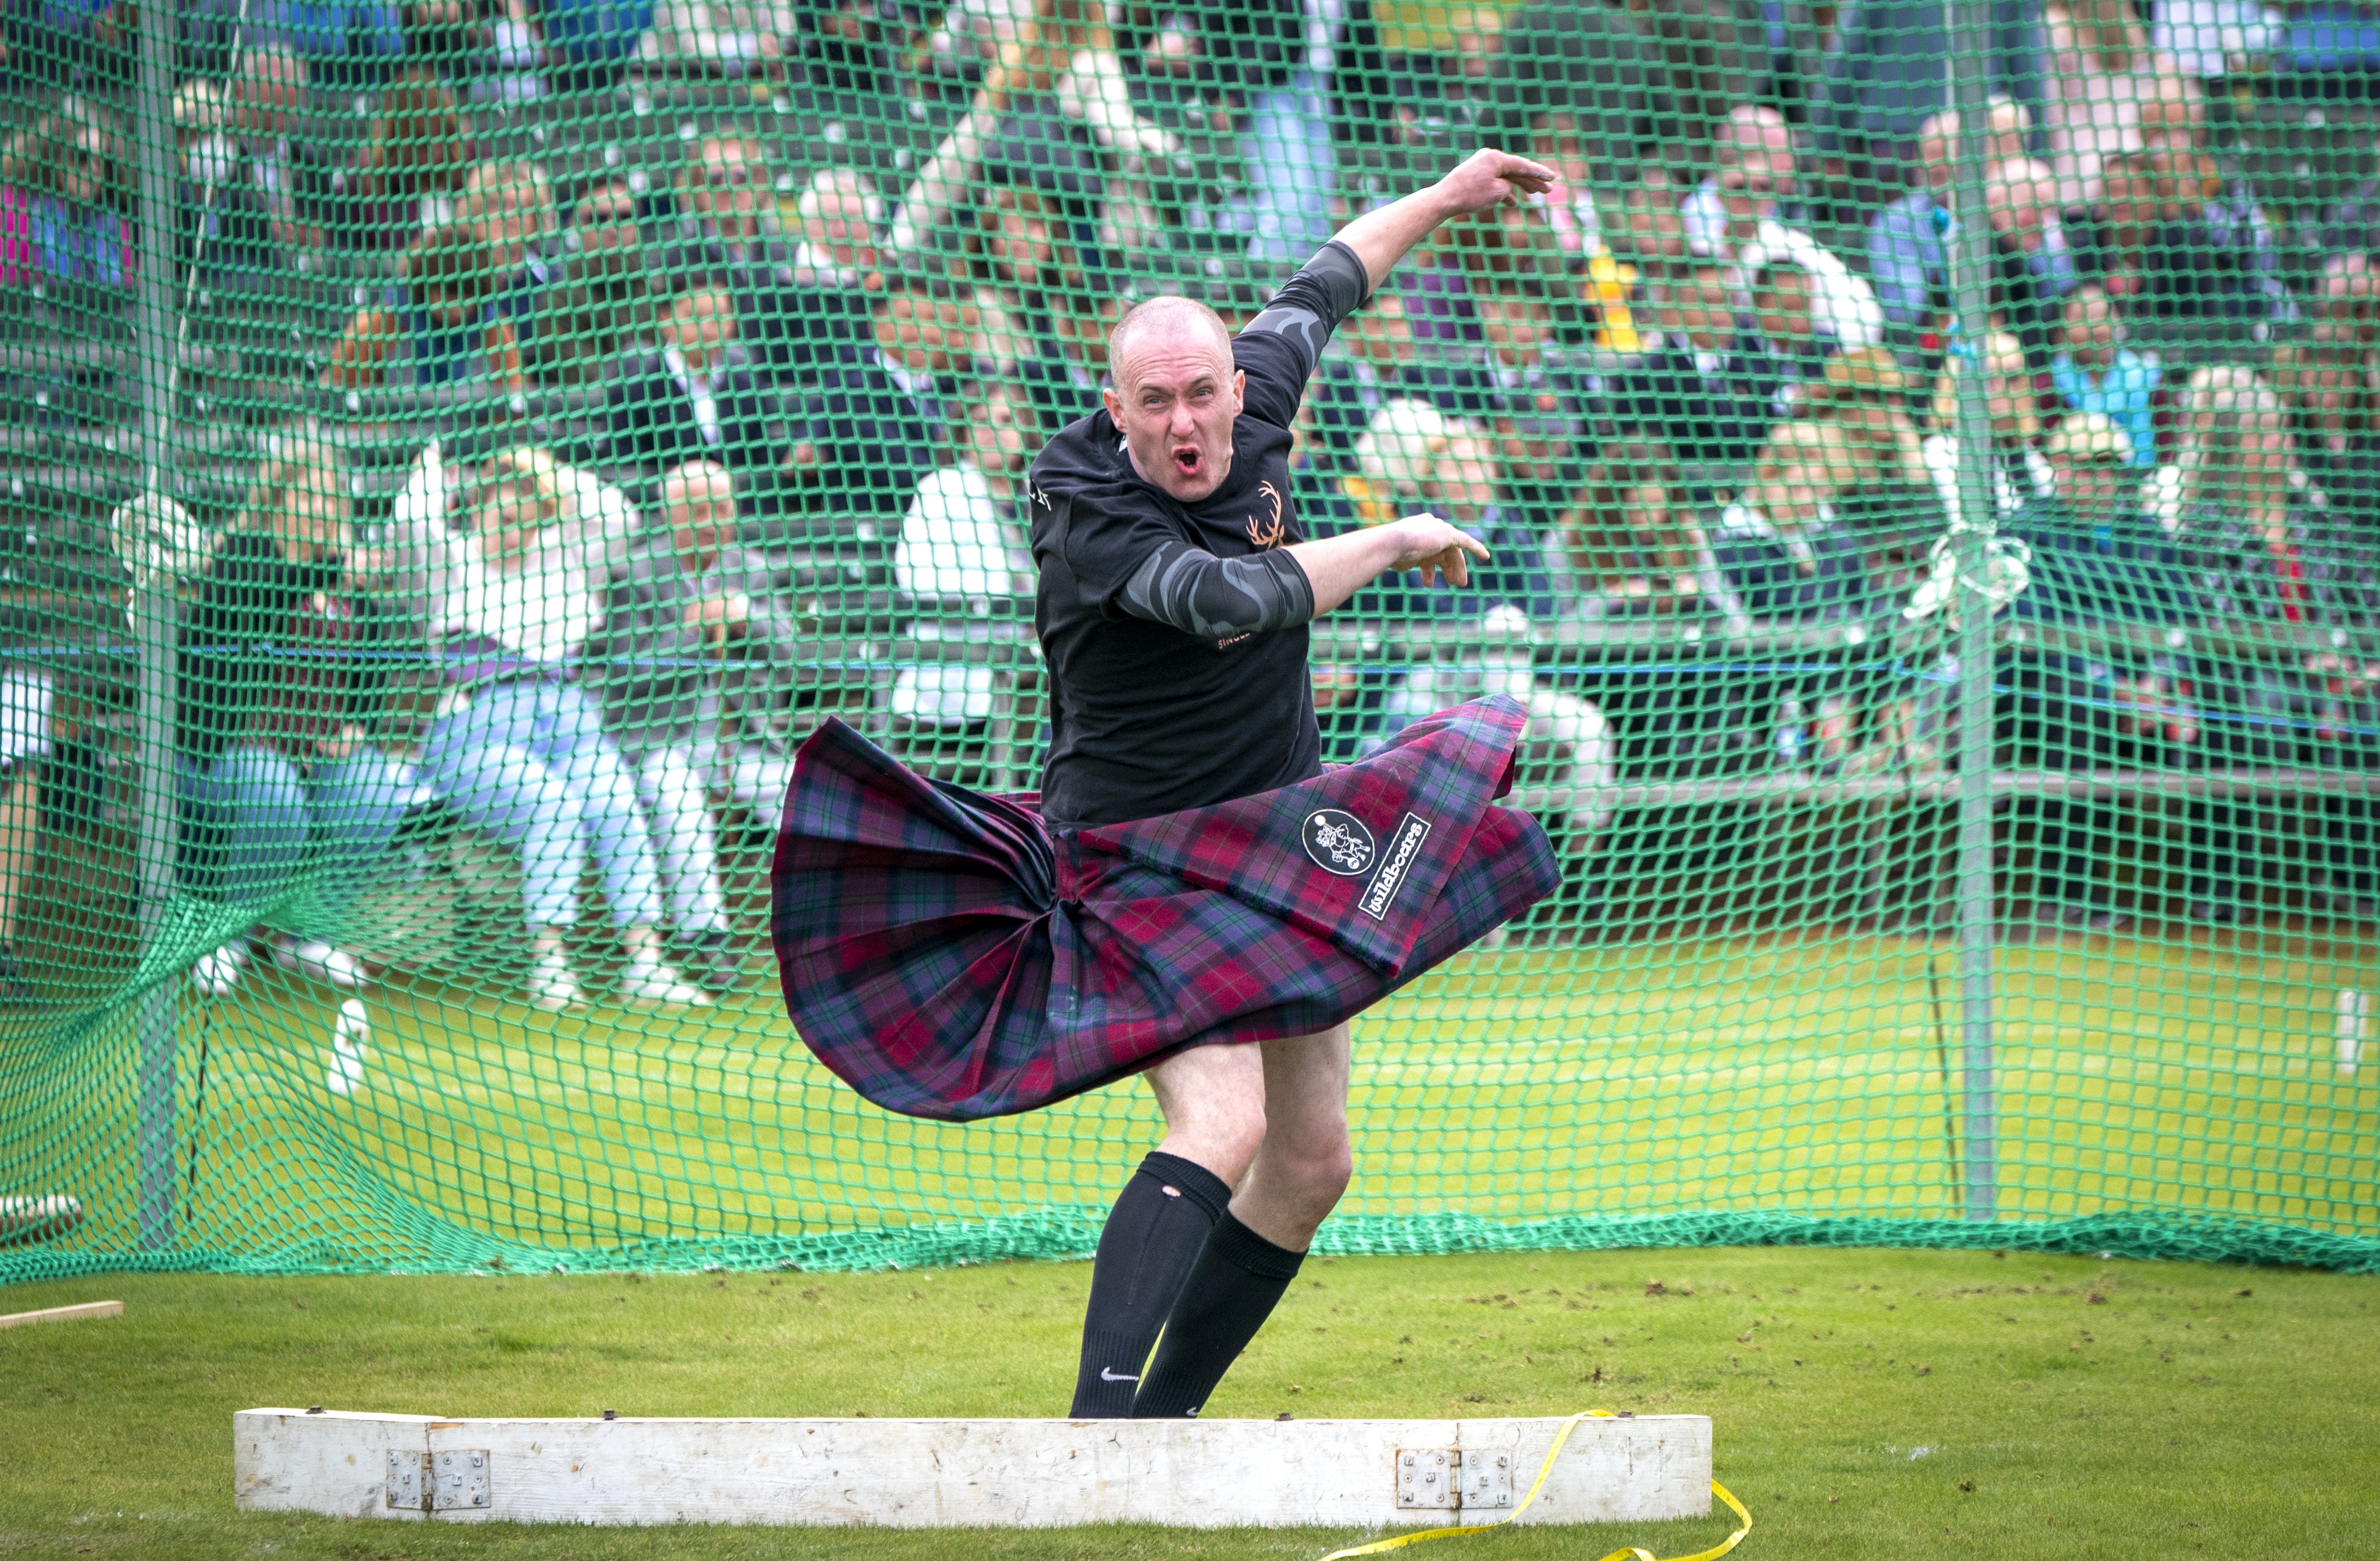 Competitors were dressed in traditional kilts (Jane Barlow/PA)